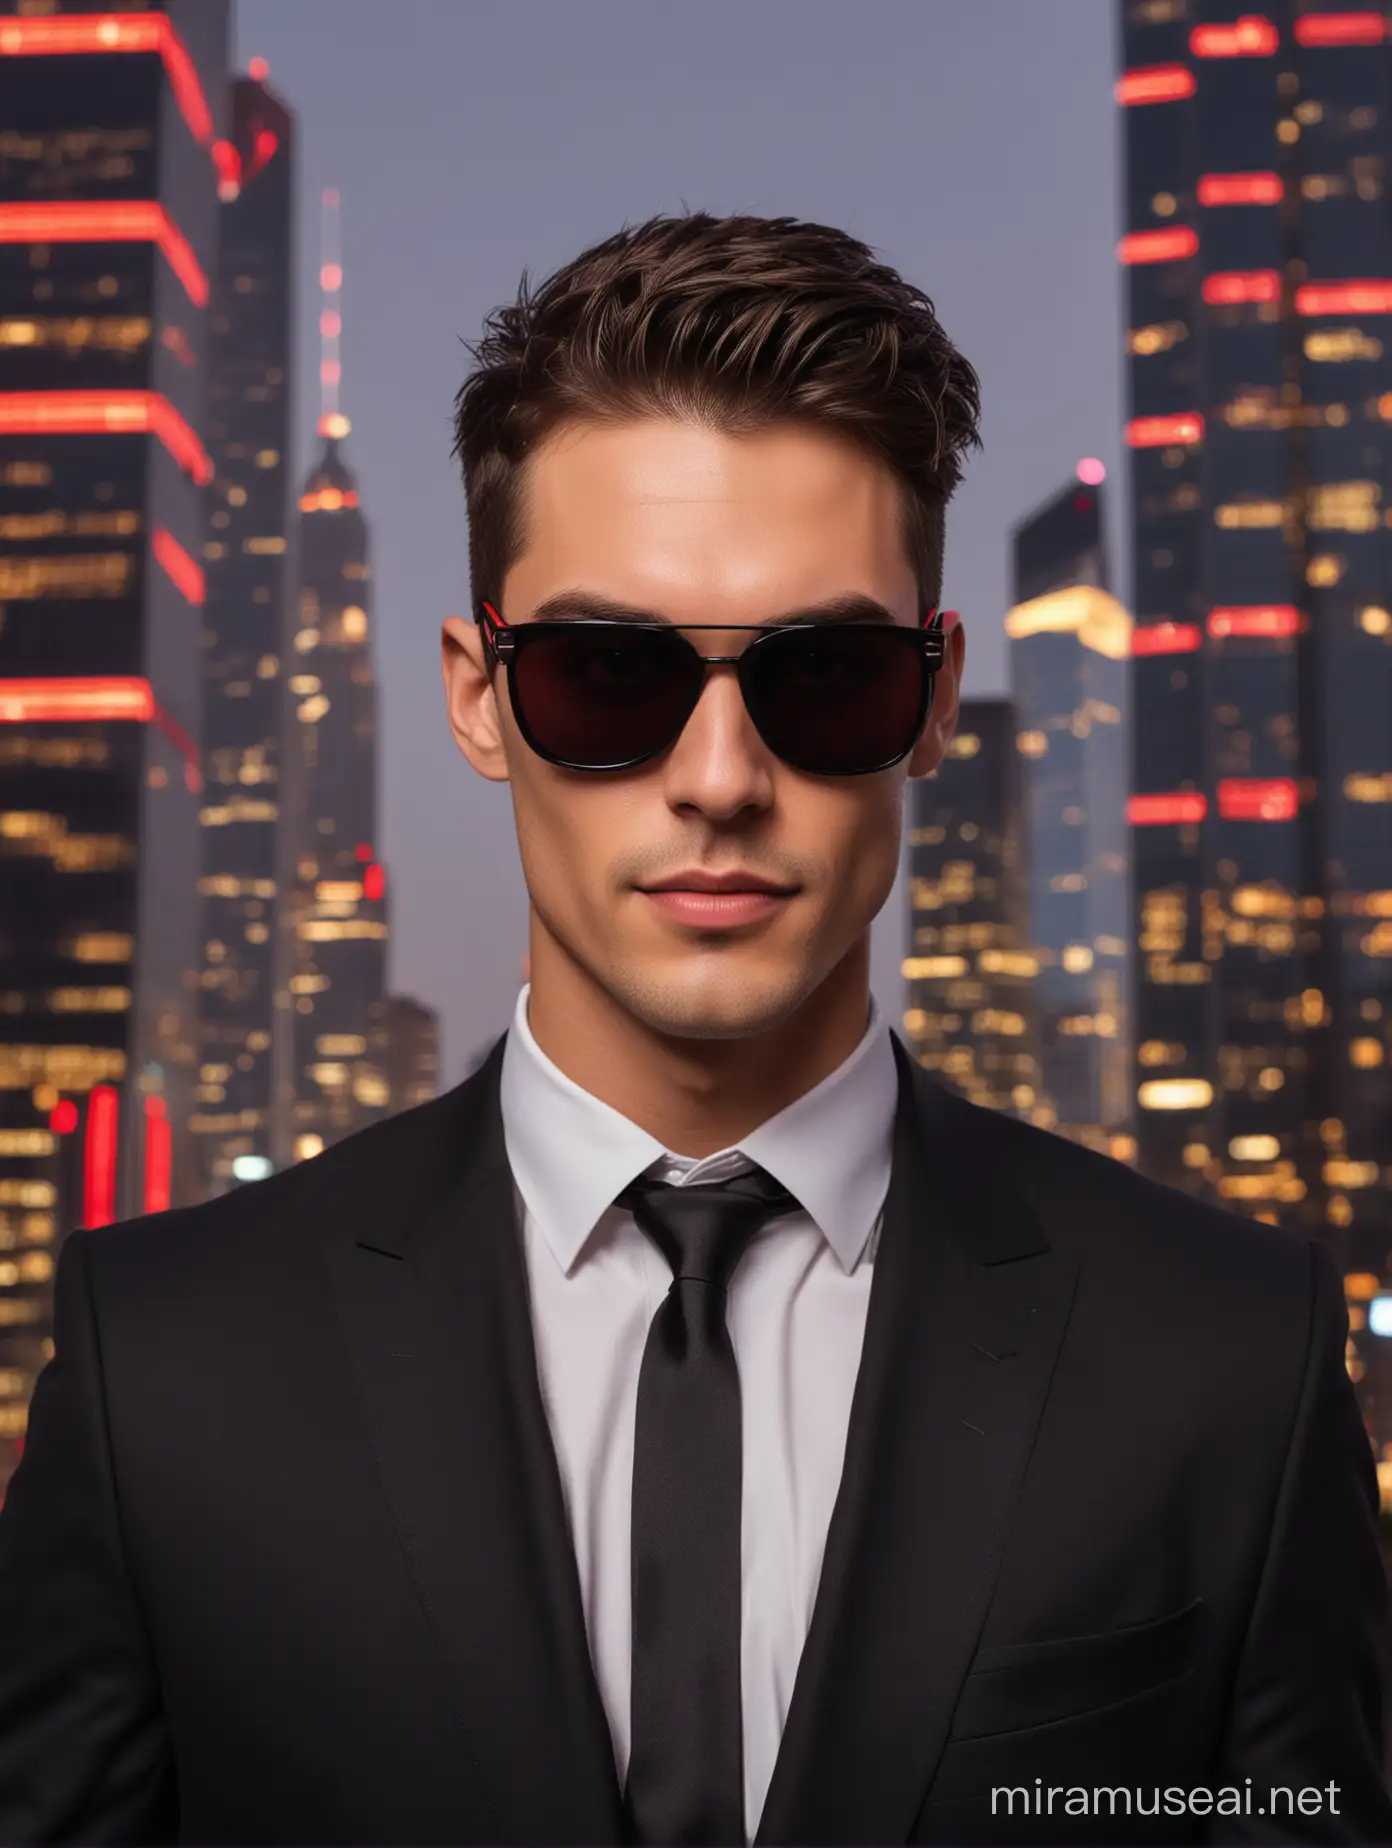 Stylish Young Man in Urban Night Scene with Skyscrapers and Red Lights